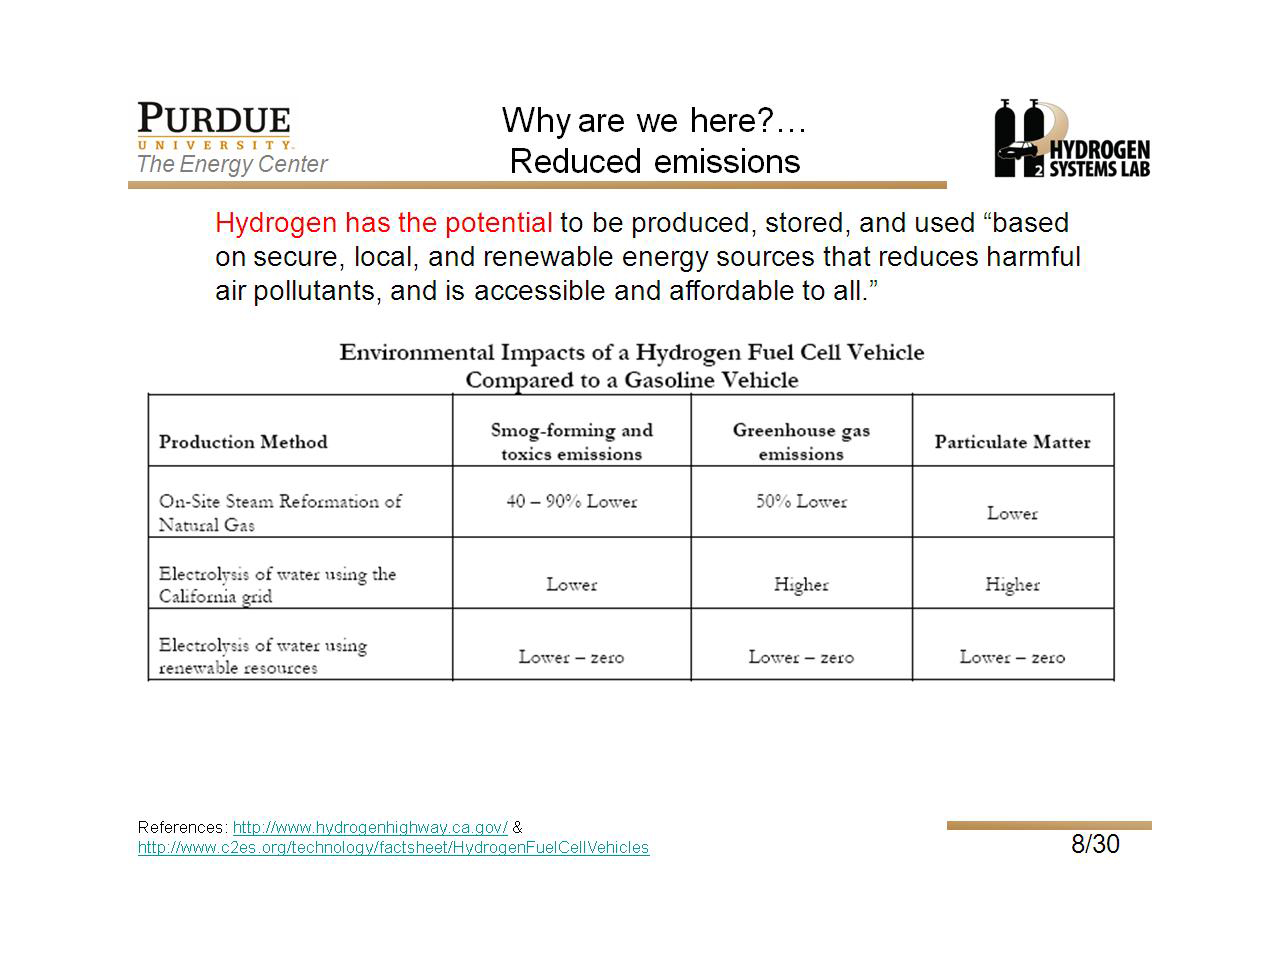 Why are we here?… Reduced emissions